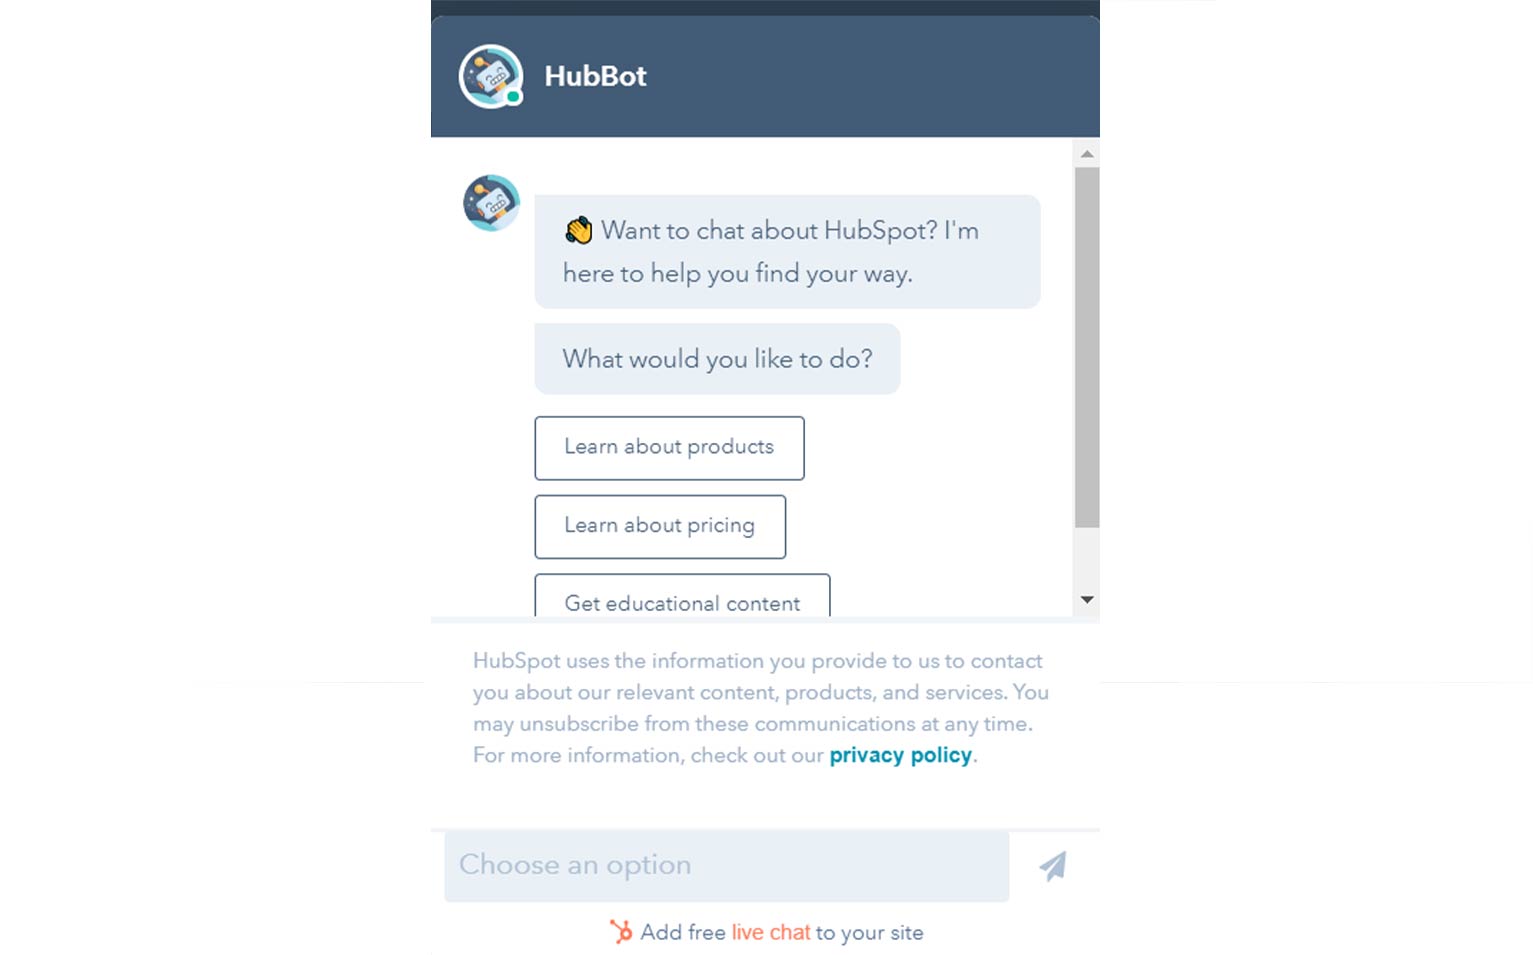 HubSpot’s chatbot has clickable buttons with options to help users find the information they need, whether products, pricing or educational content.